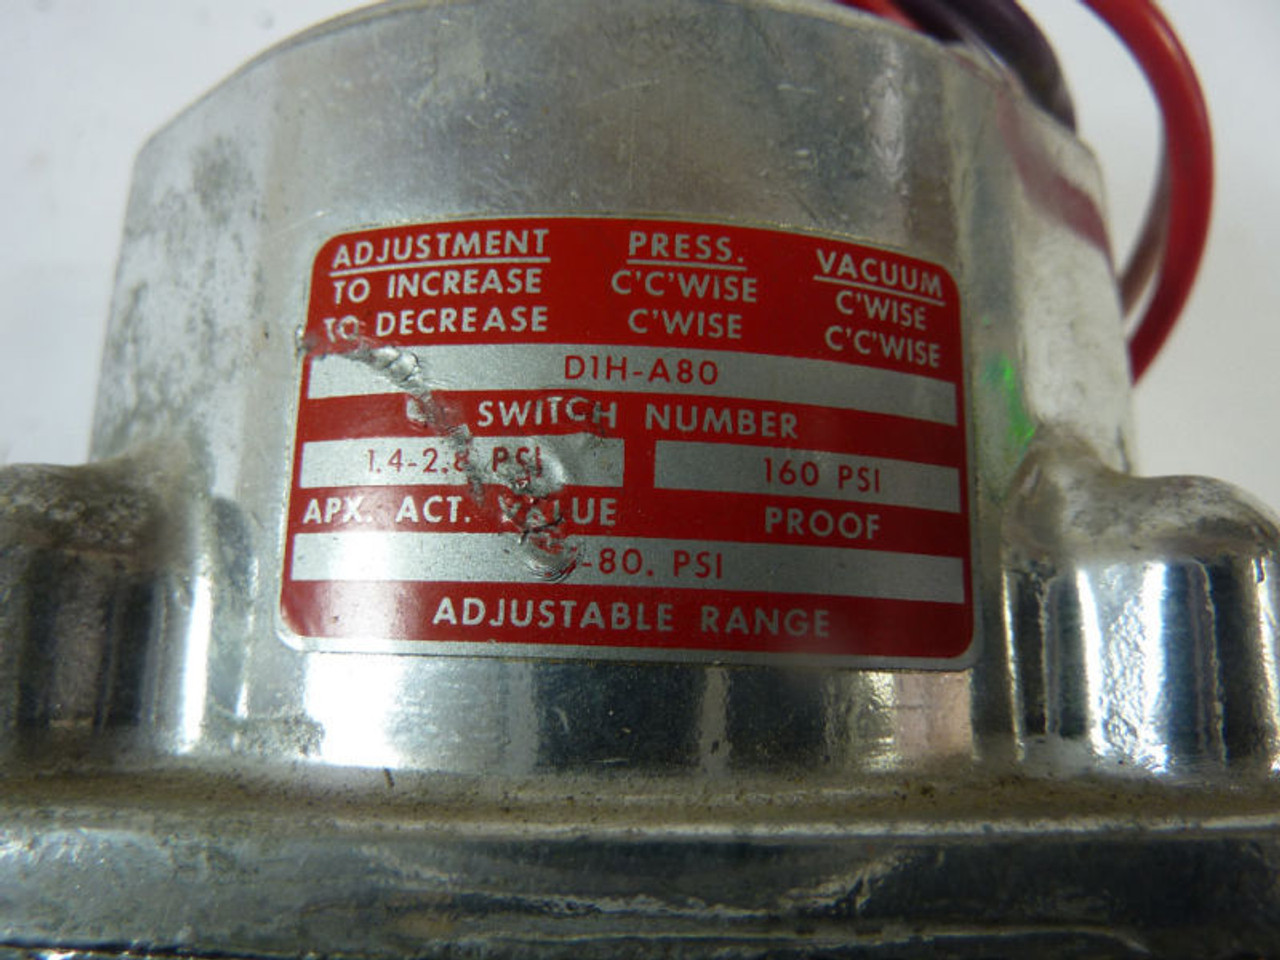 Barksdale D1H-A80 Pressure Switch 160 PSI USED